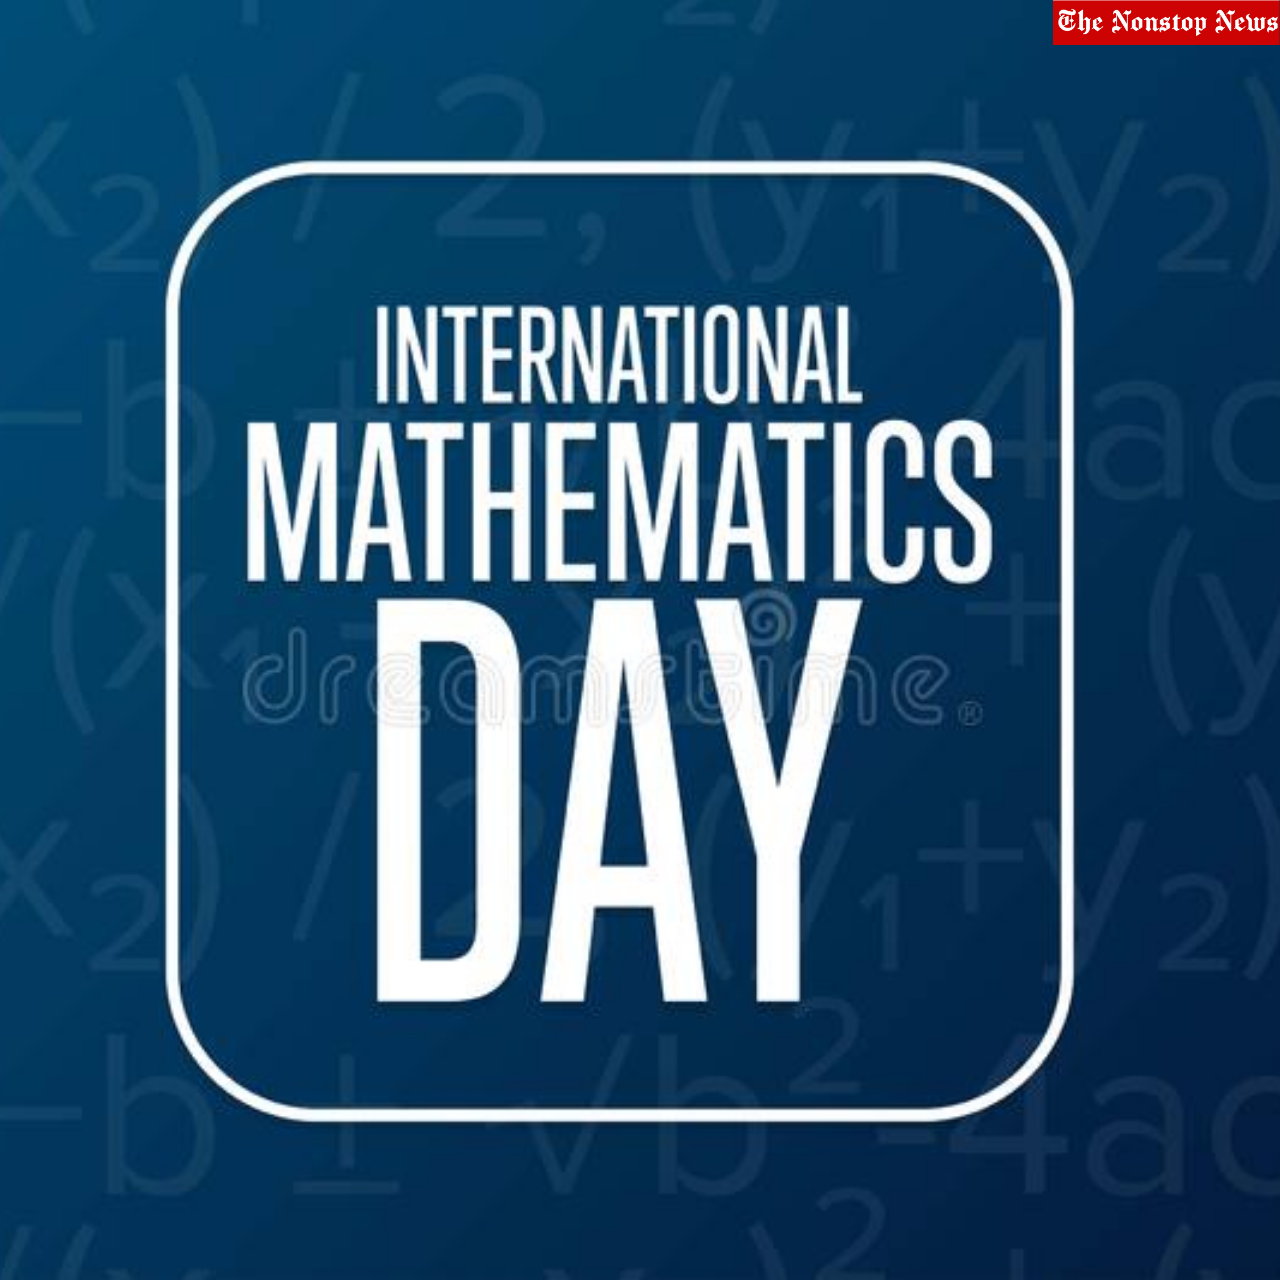 International Day of Mathematics 2022: Theme, History, Significance, Importance, Celebration, Activities, and everything about 'Pi Day'